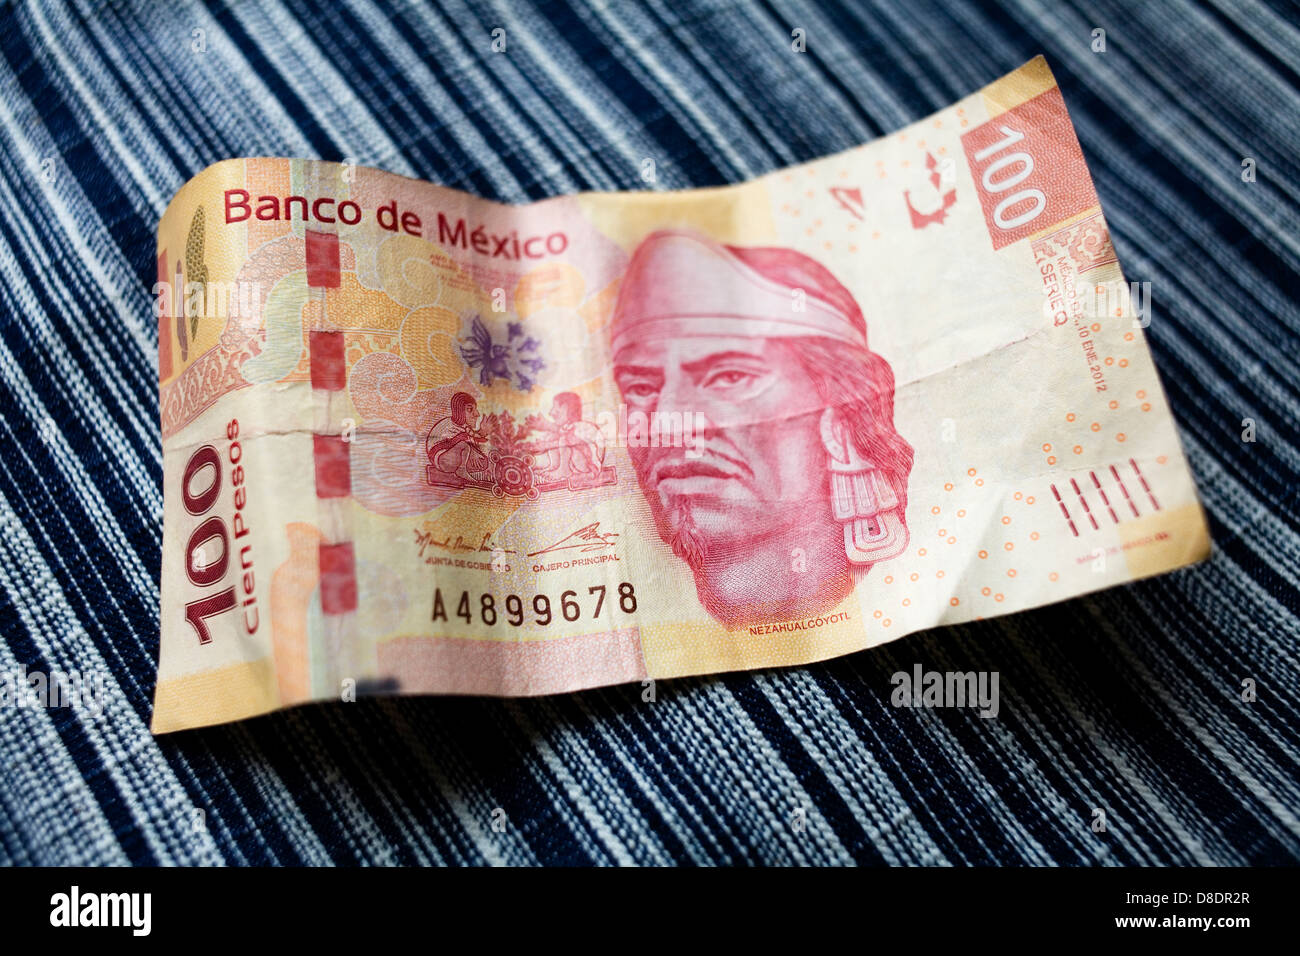 A 100 Peso Mexican Bank Note Stock Photo